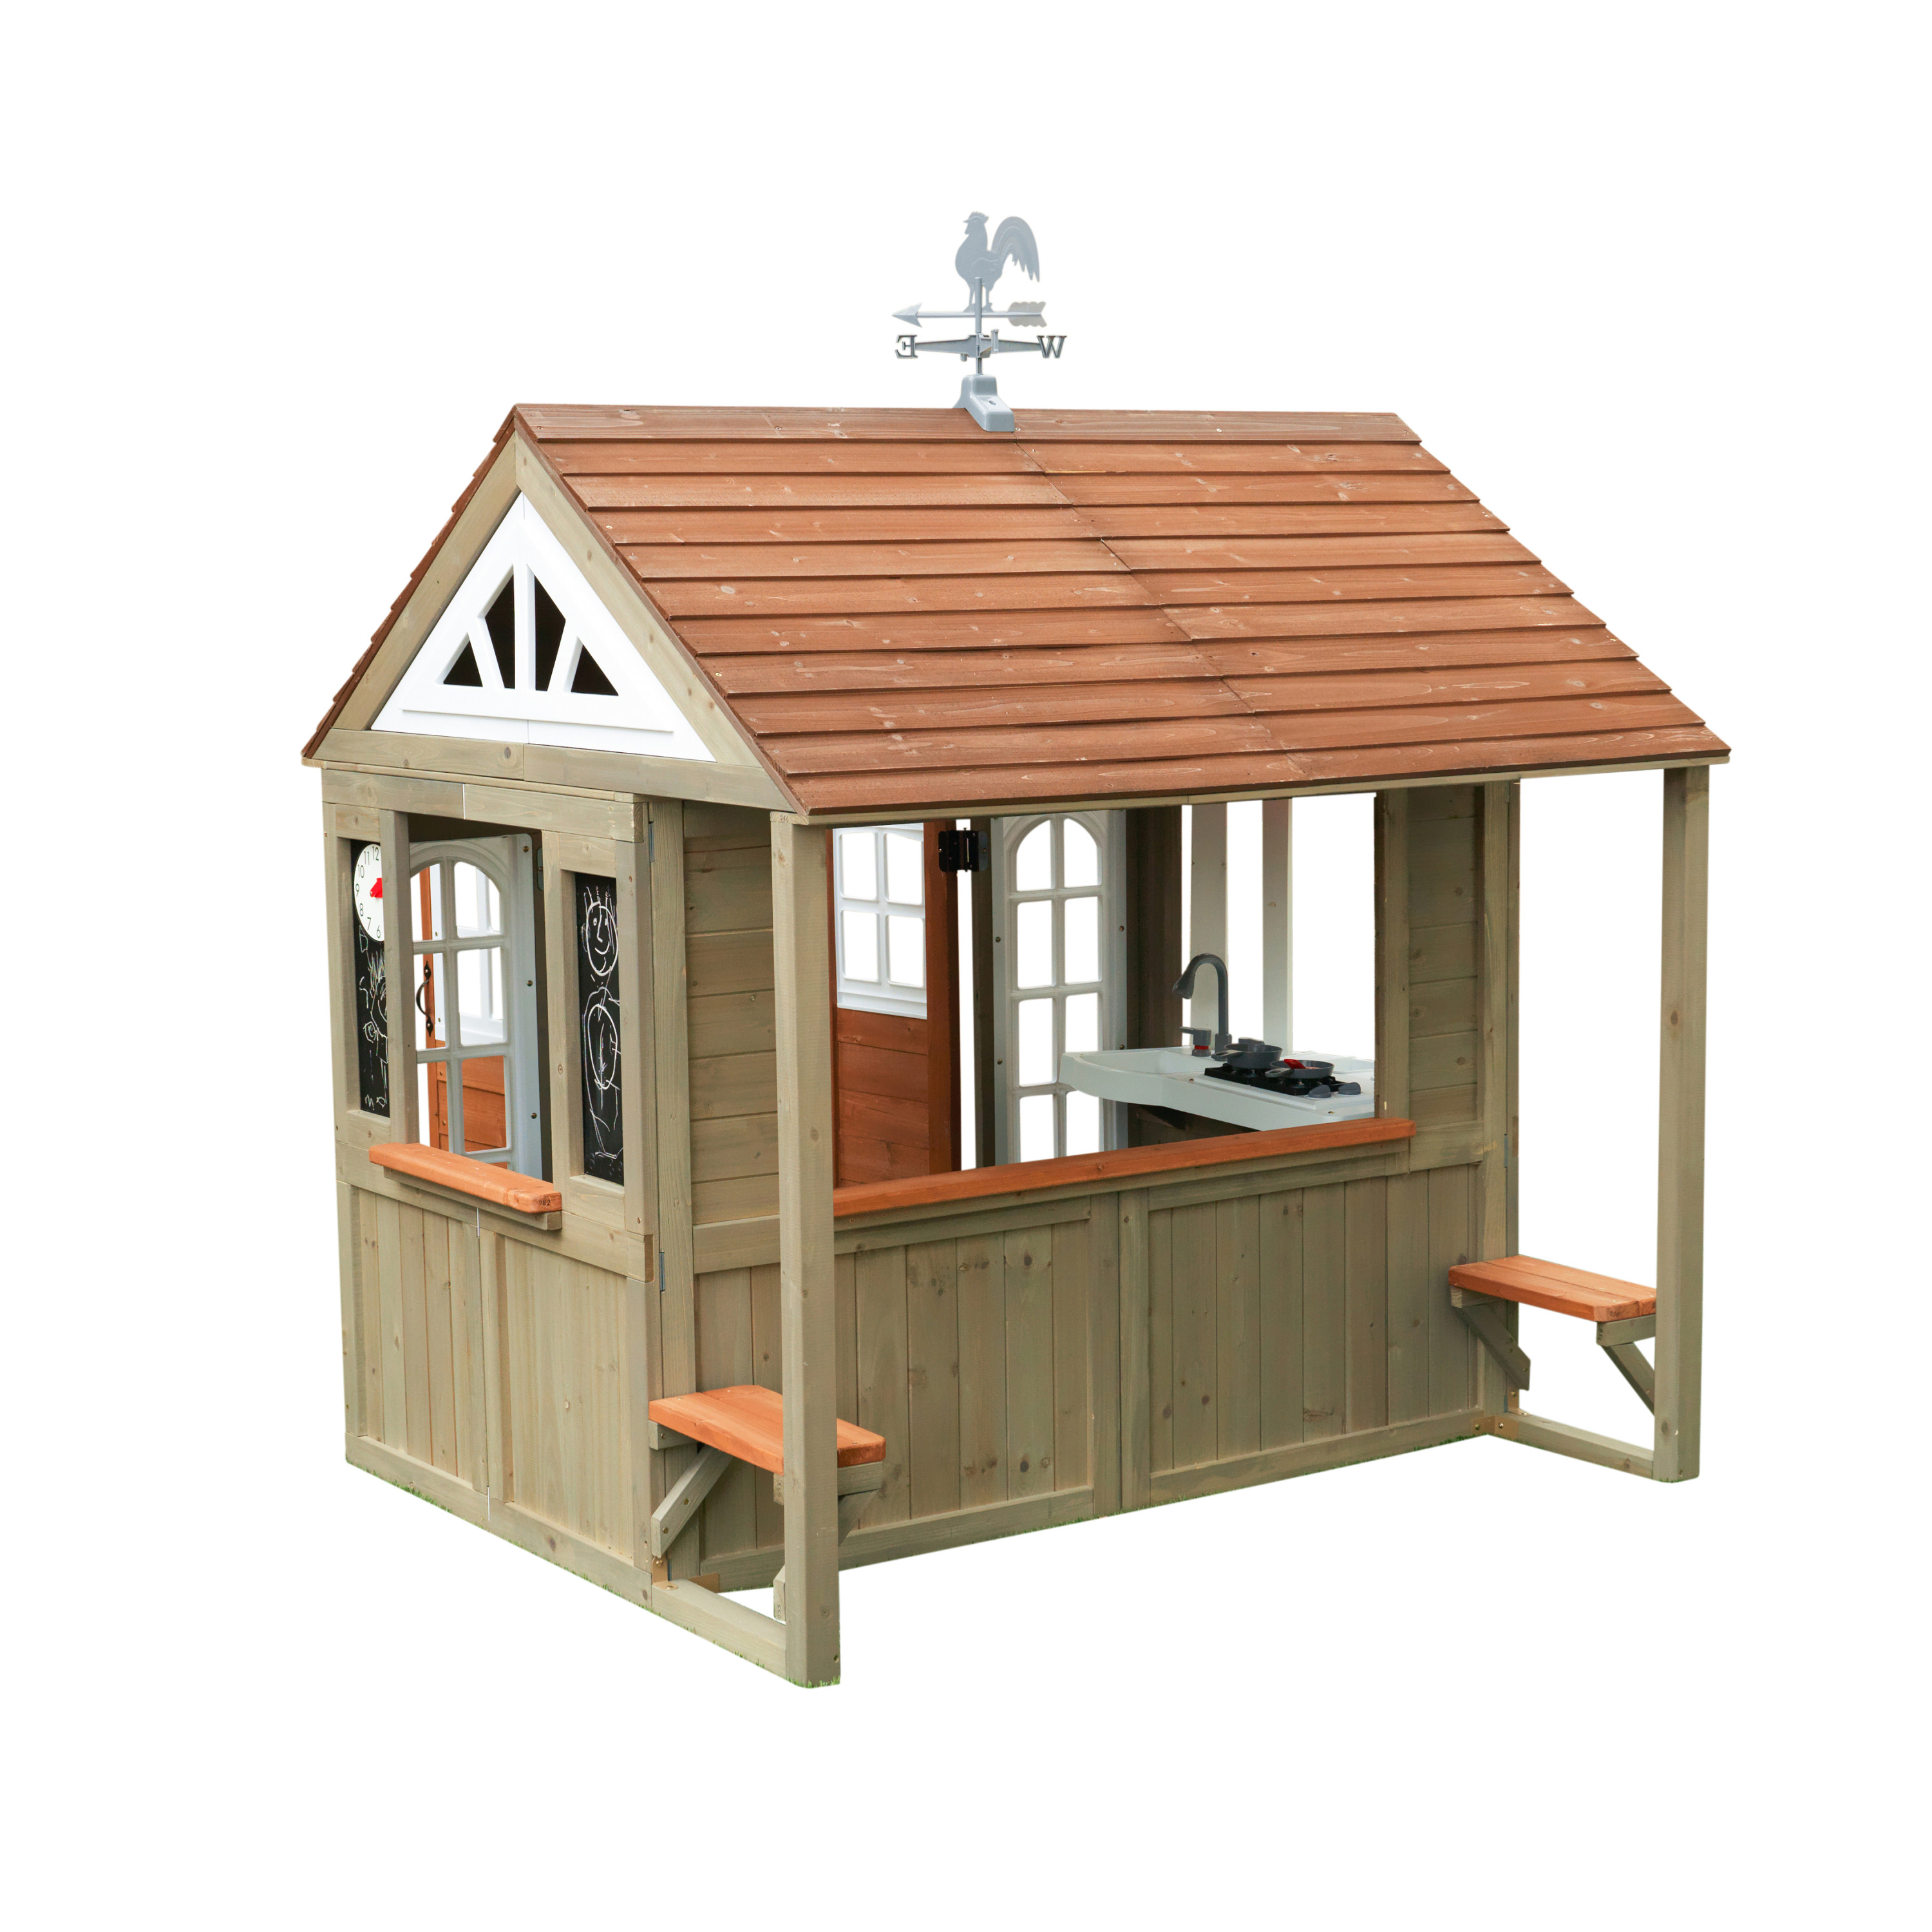 KidKraft Country Vista Wooden Outdoor Playhouse with Double Doors, Play Kitchen & Benches - image 5 of 28